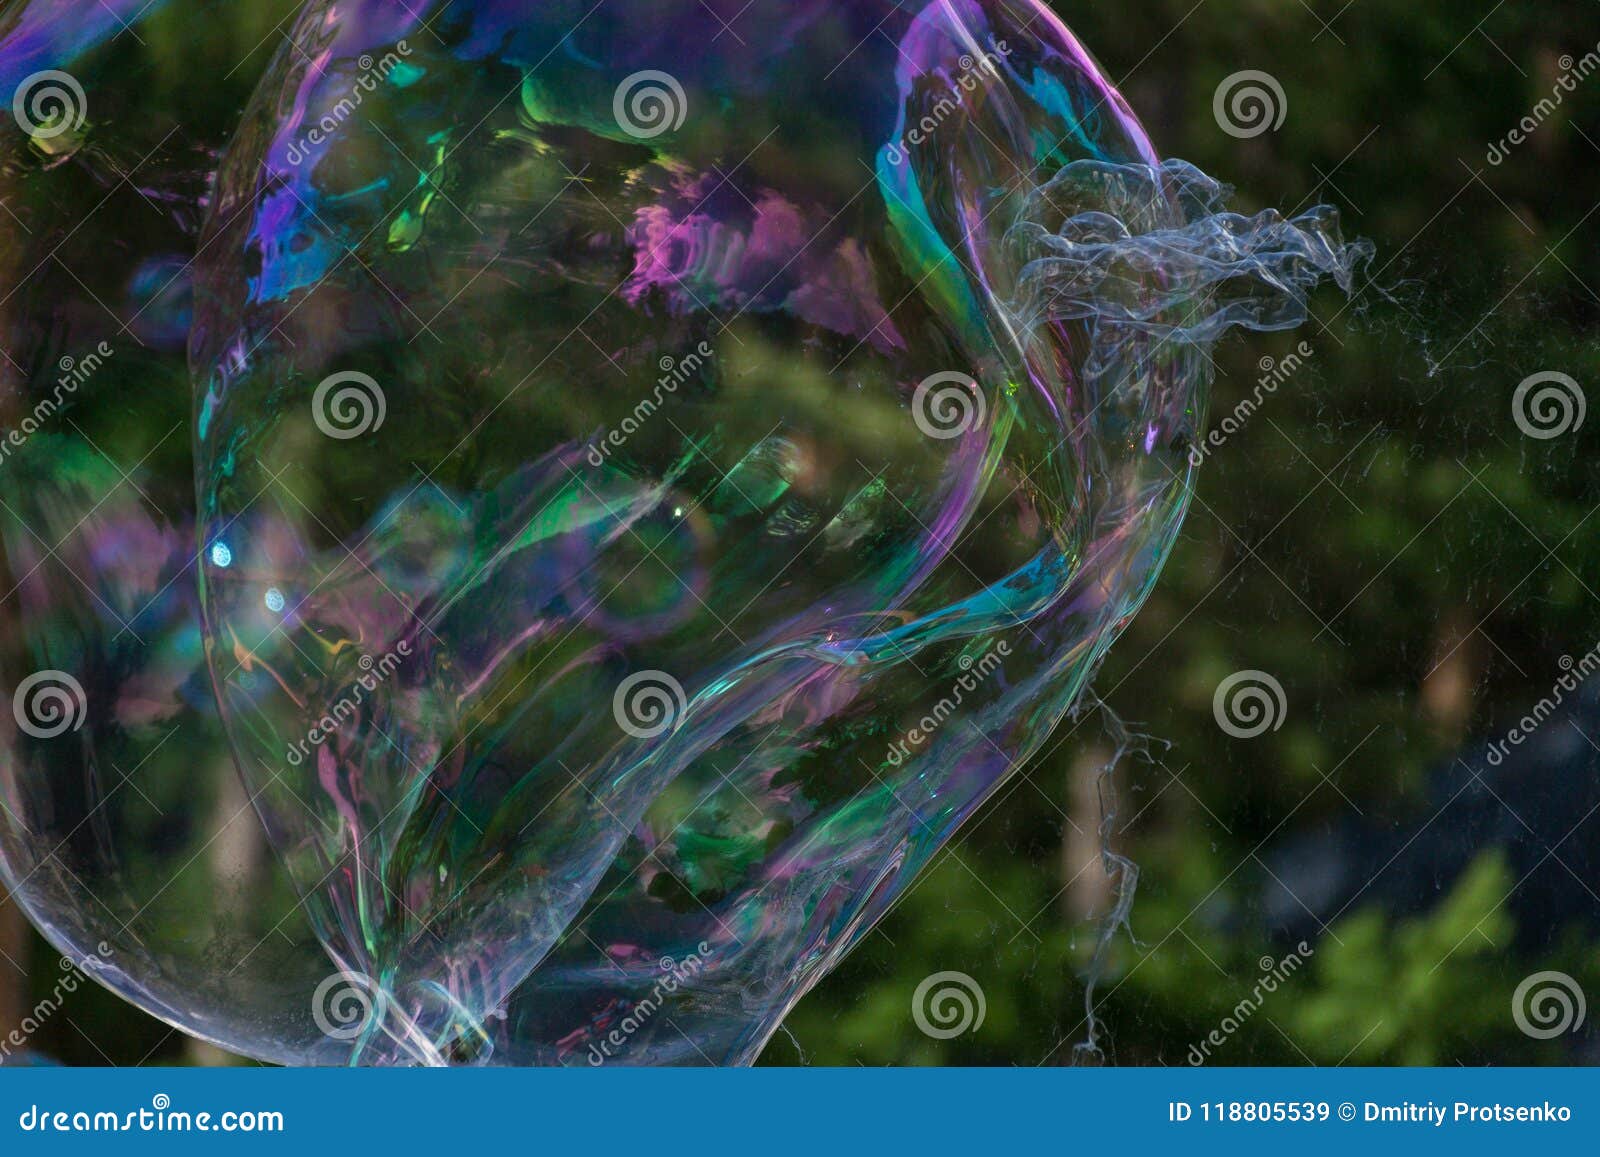 Iridescent Large Soap Bubbles Against the Background of the Forest ...